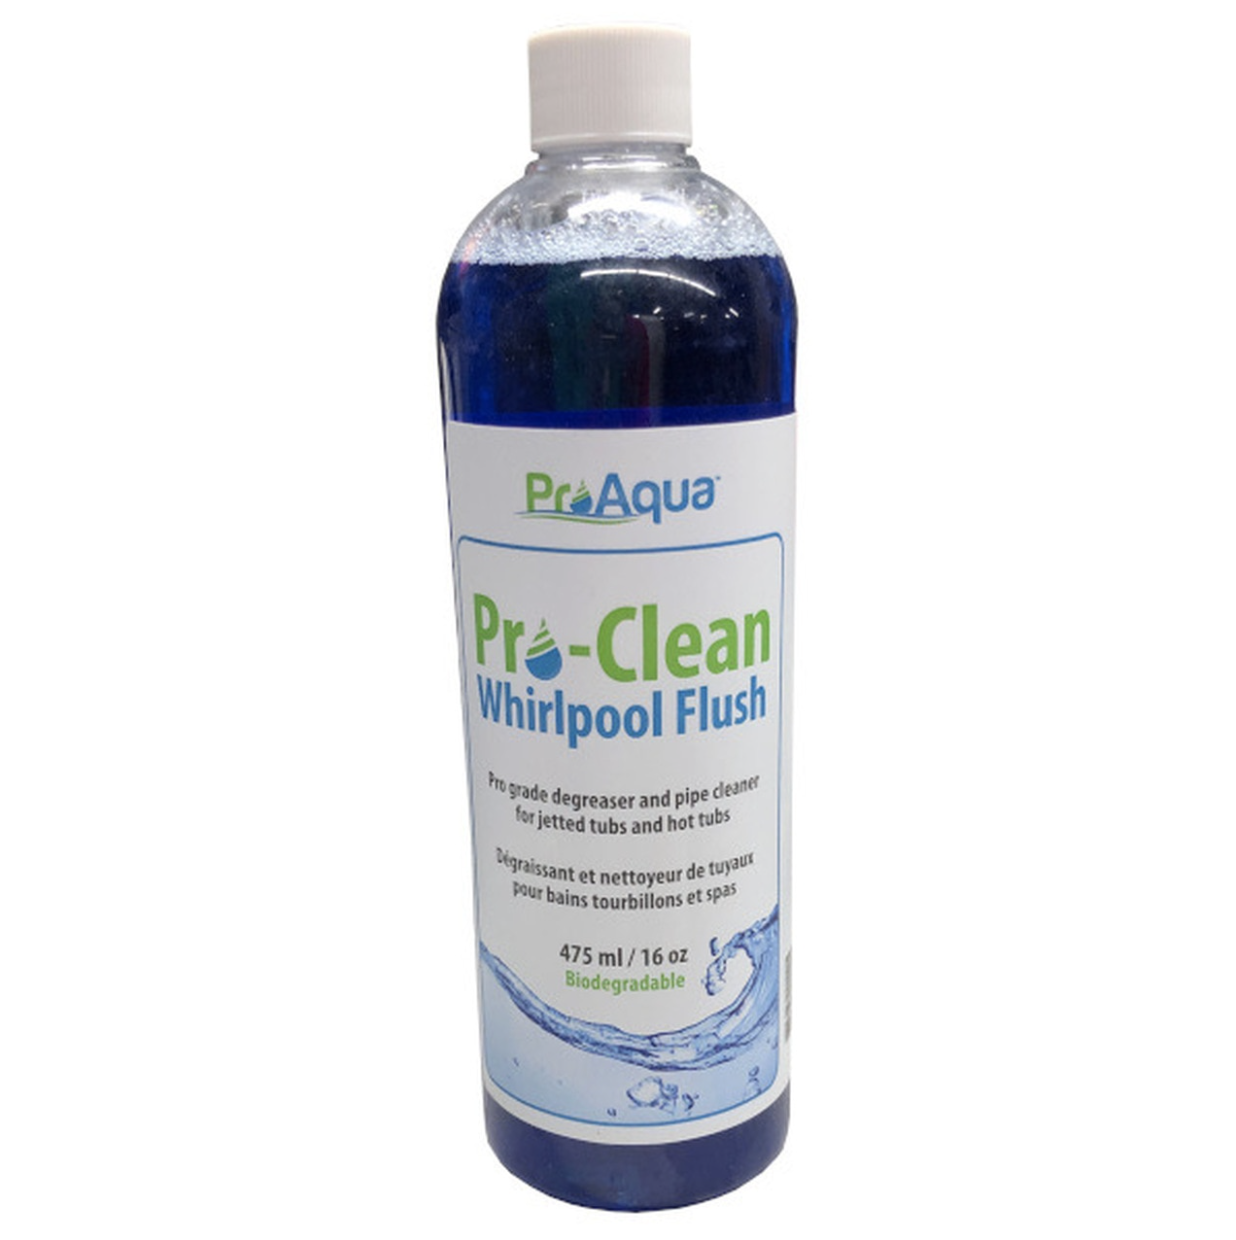 Pro-Clean Whirlpool Flush Pipe Cleaner